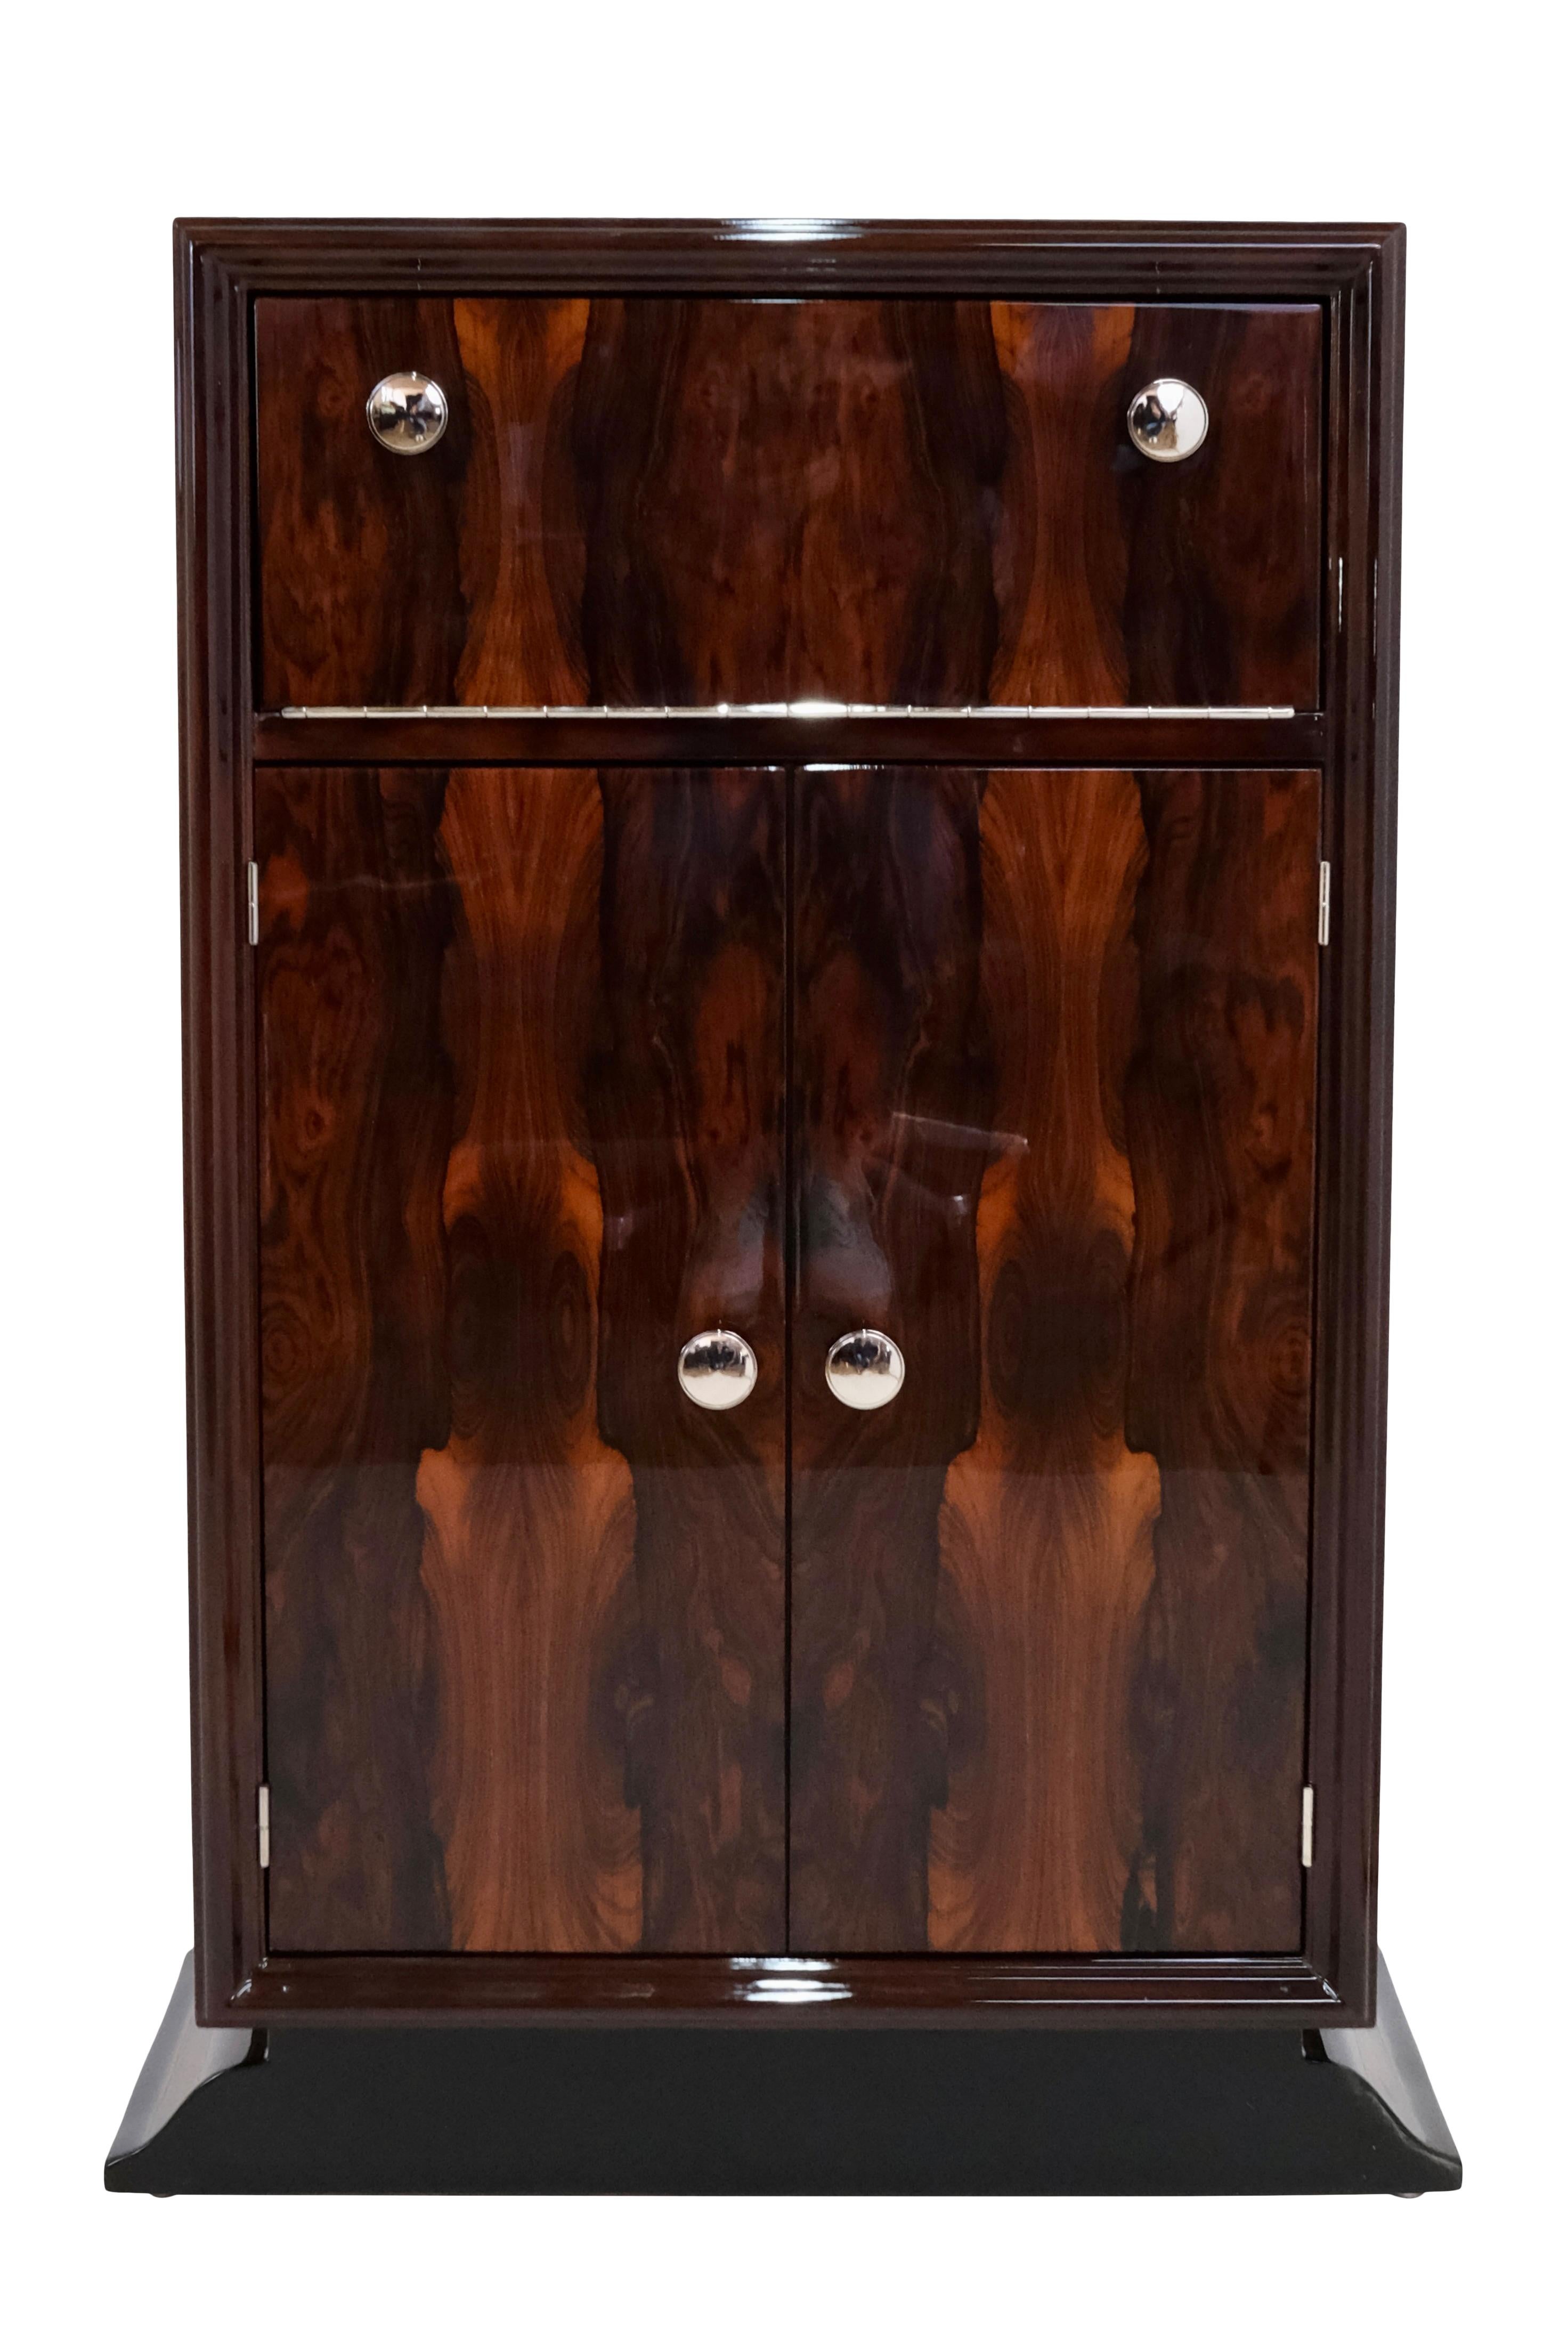 Bar furniture
probably ash veneer, high gloss lacquered
Behind the narrow flap, as well as behind the two doors, a mirrored interior is revealed.

Original Art Deco, France 1930s

Dimensions:
Width: 60 cm
Width, base: 70 cm
Height: 101 cm
Depth: 38